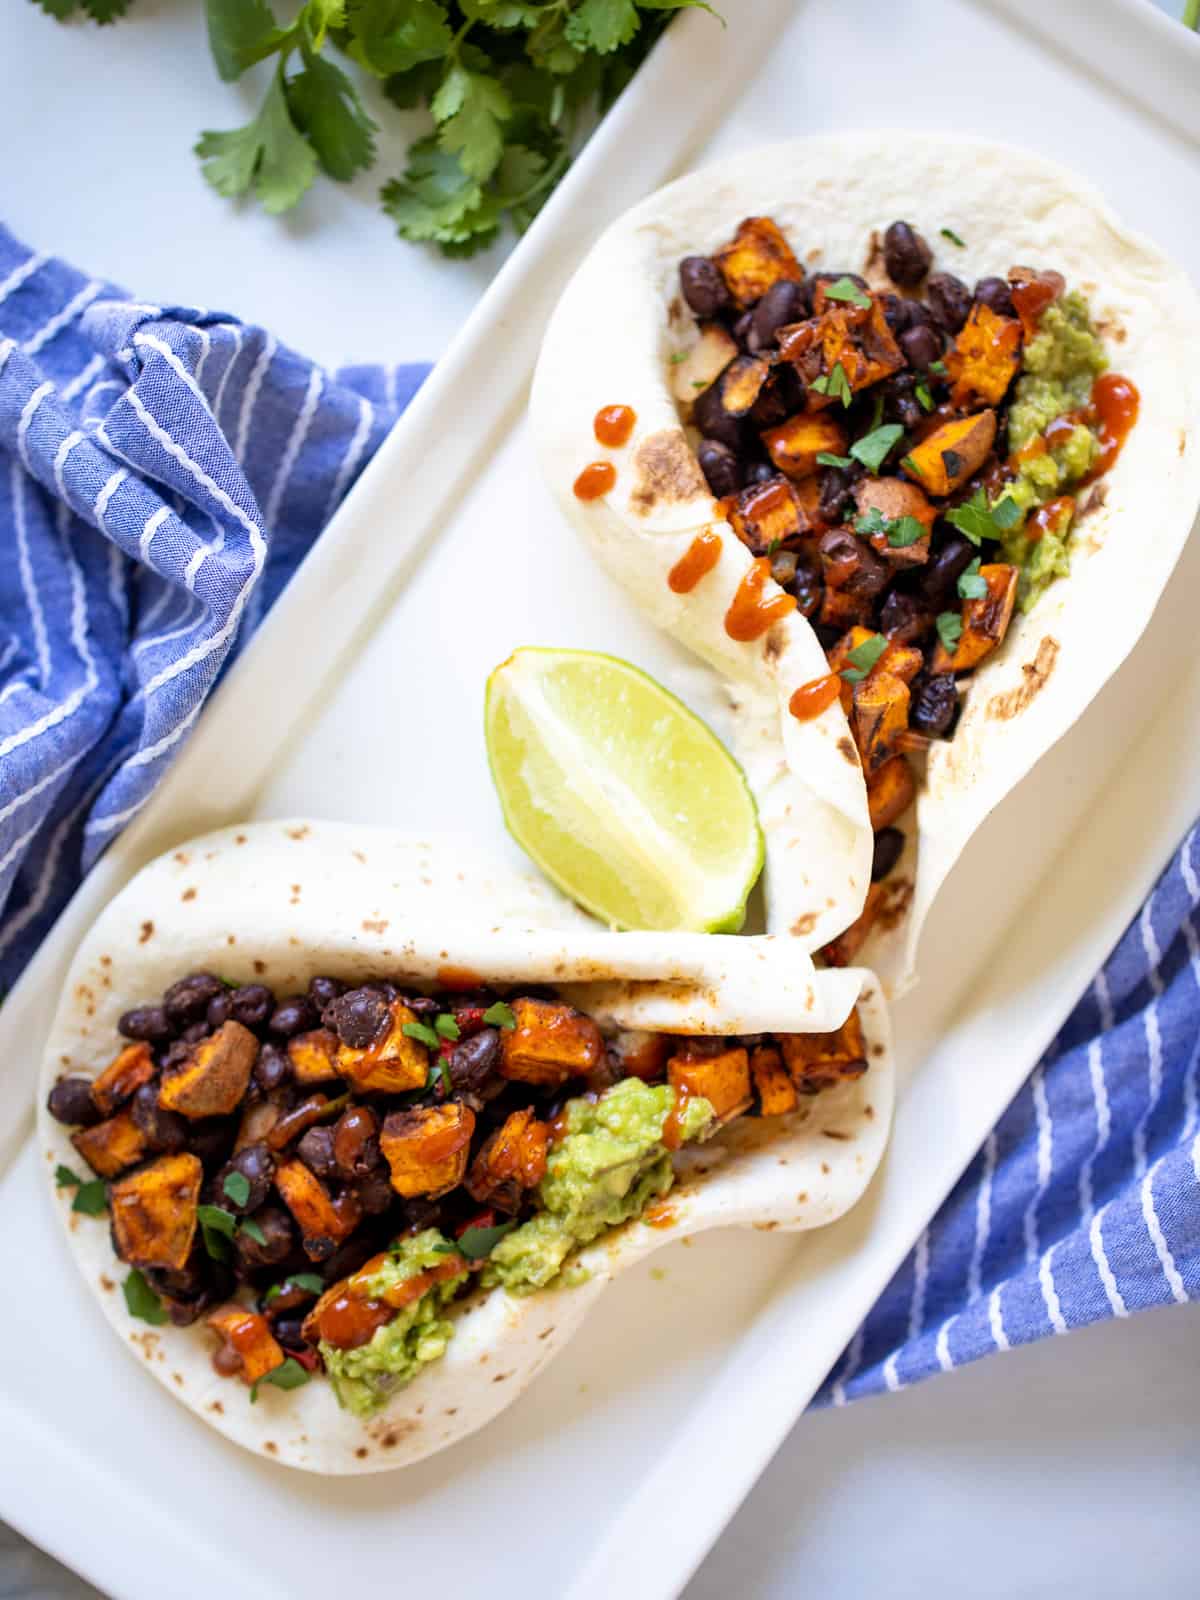 Two flour tortilla filled with sweet potatoes, black beans, and guacamole.